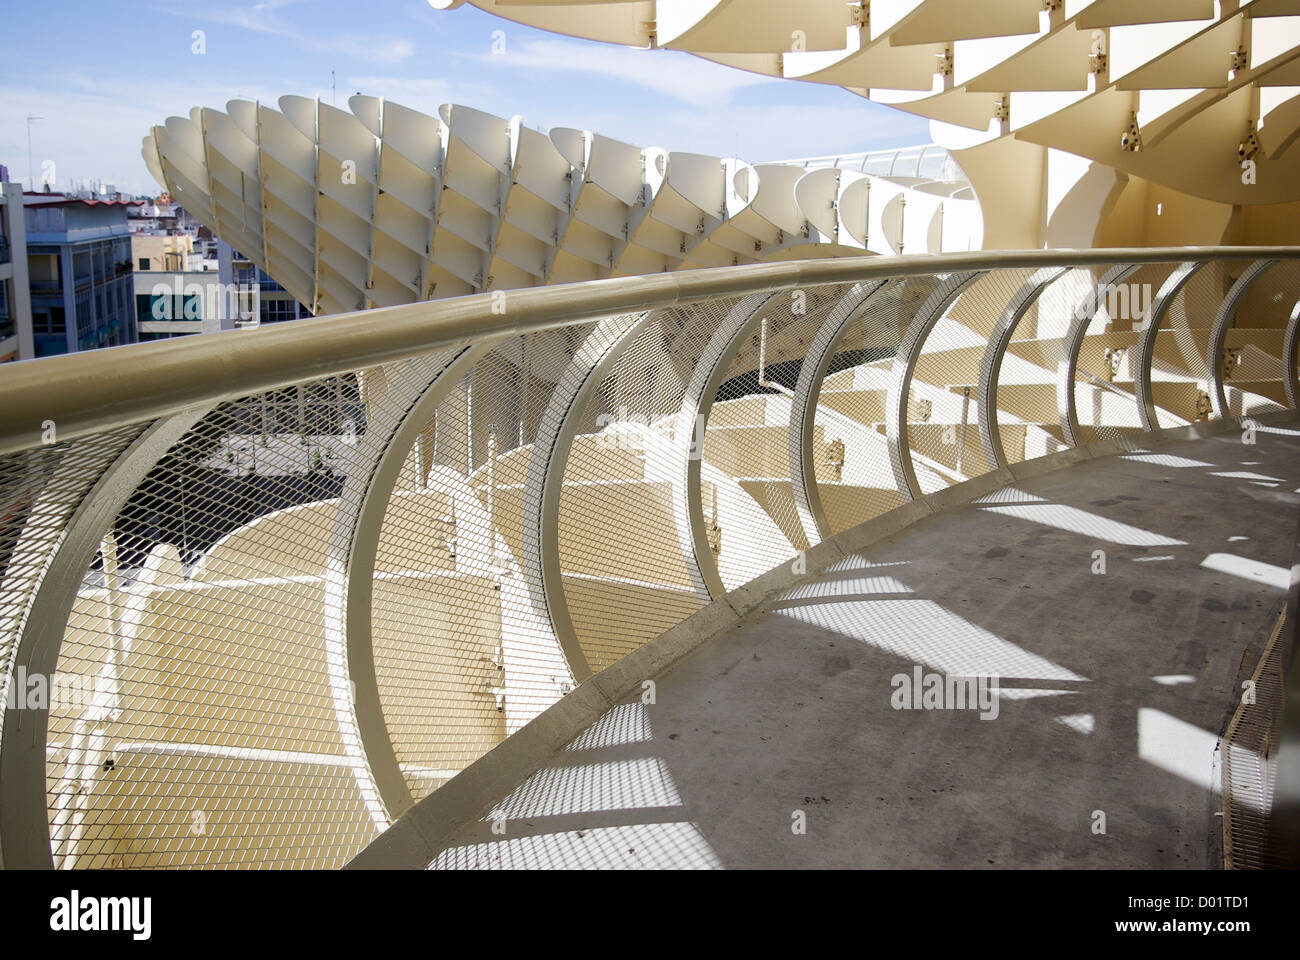 Shadows and railings on the viewing deck of the Metropol Parasol in Seville, Andalusia, Spain Stock Photo